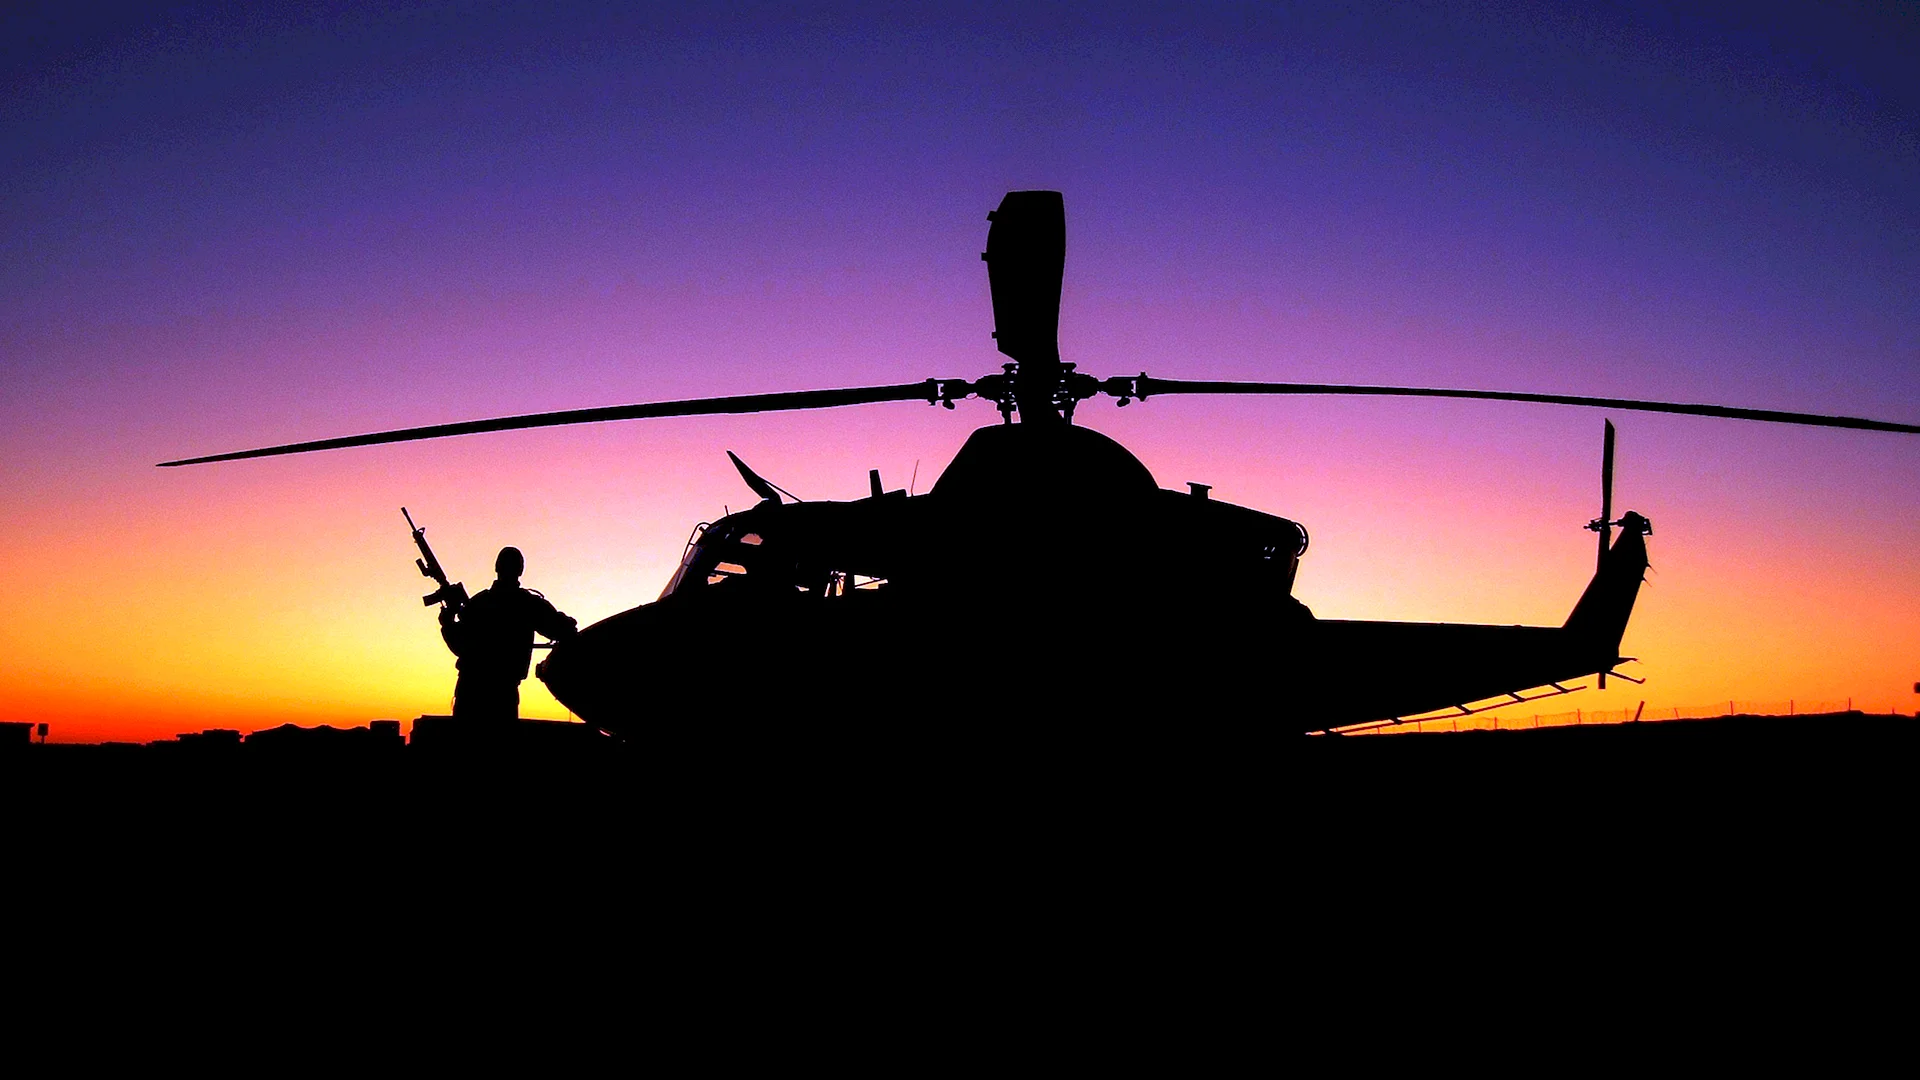 Helicopter Night Wallpaper